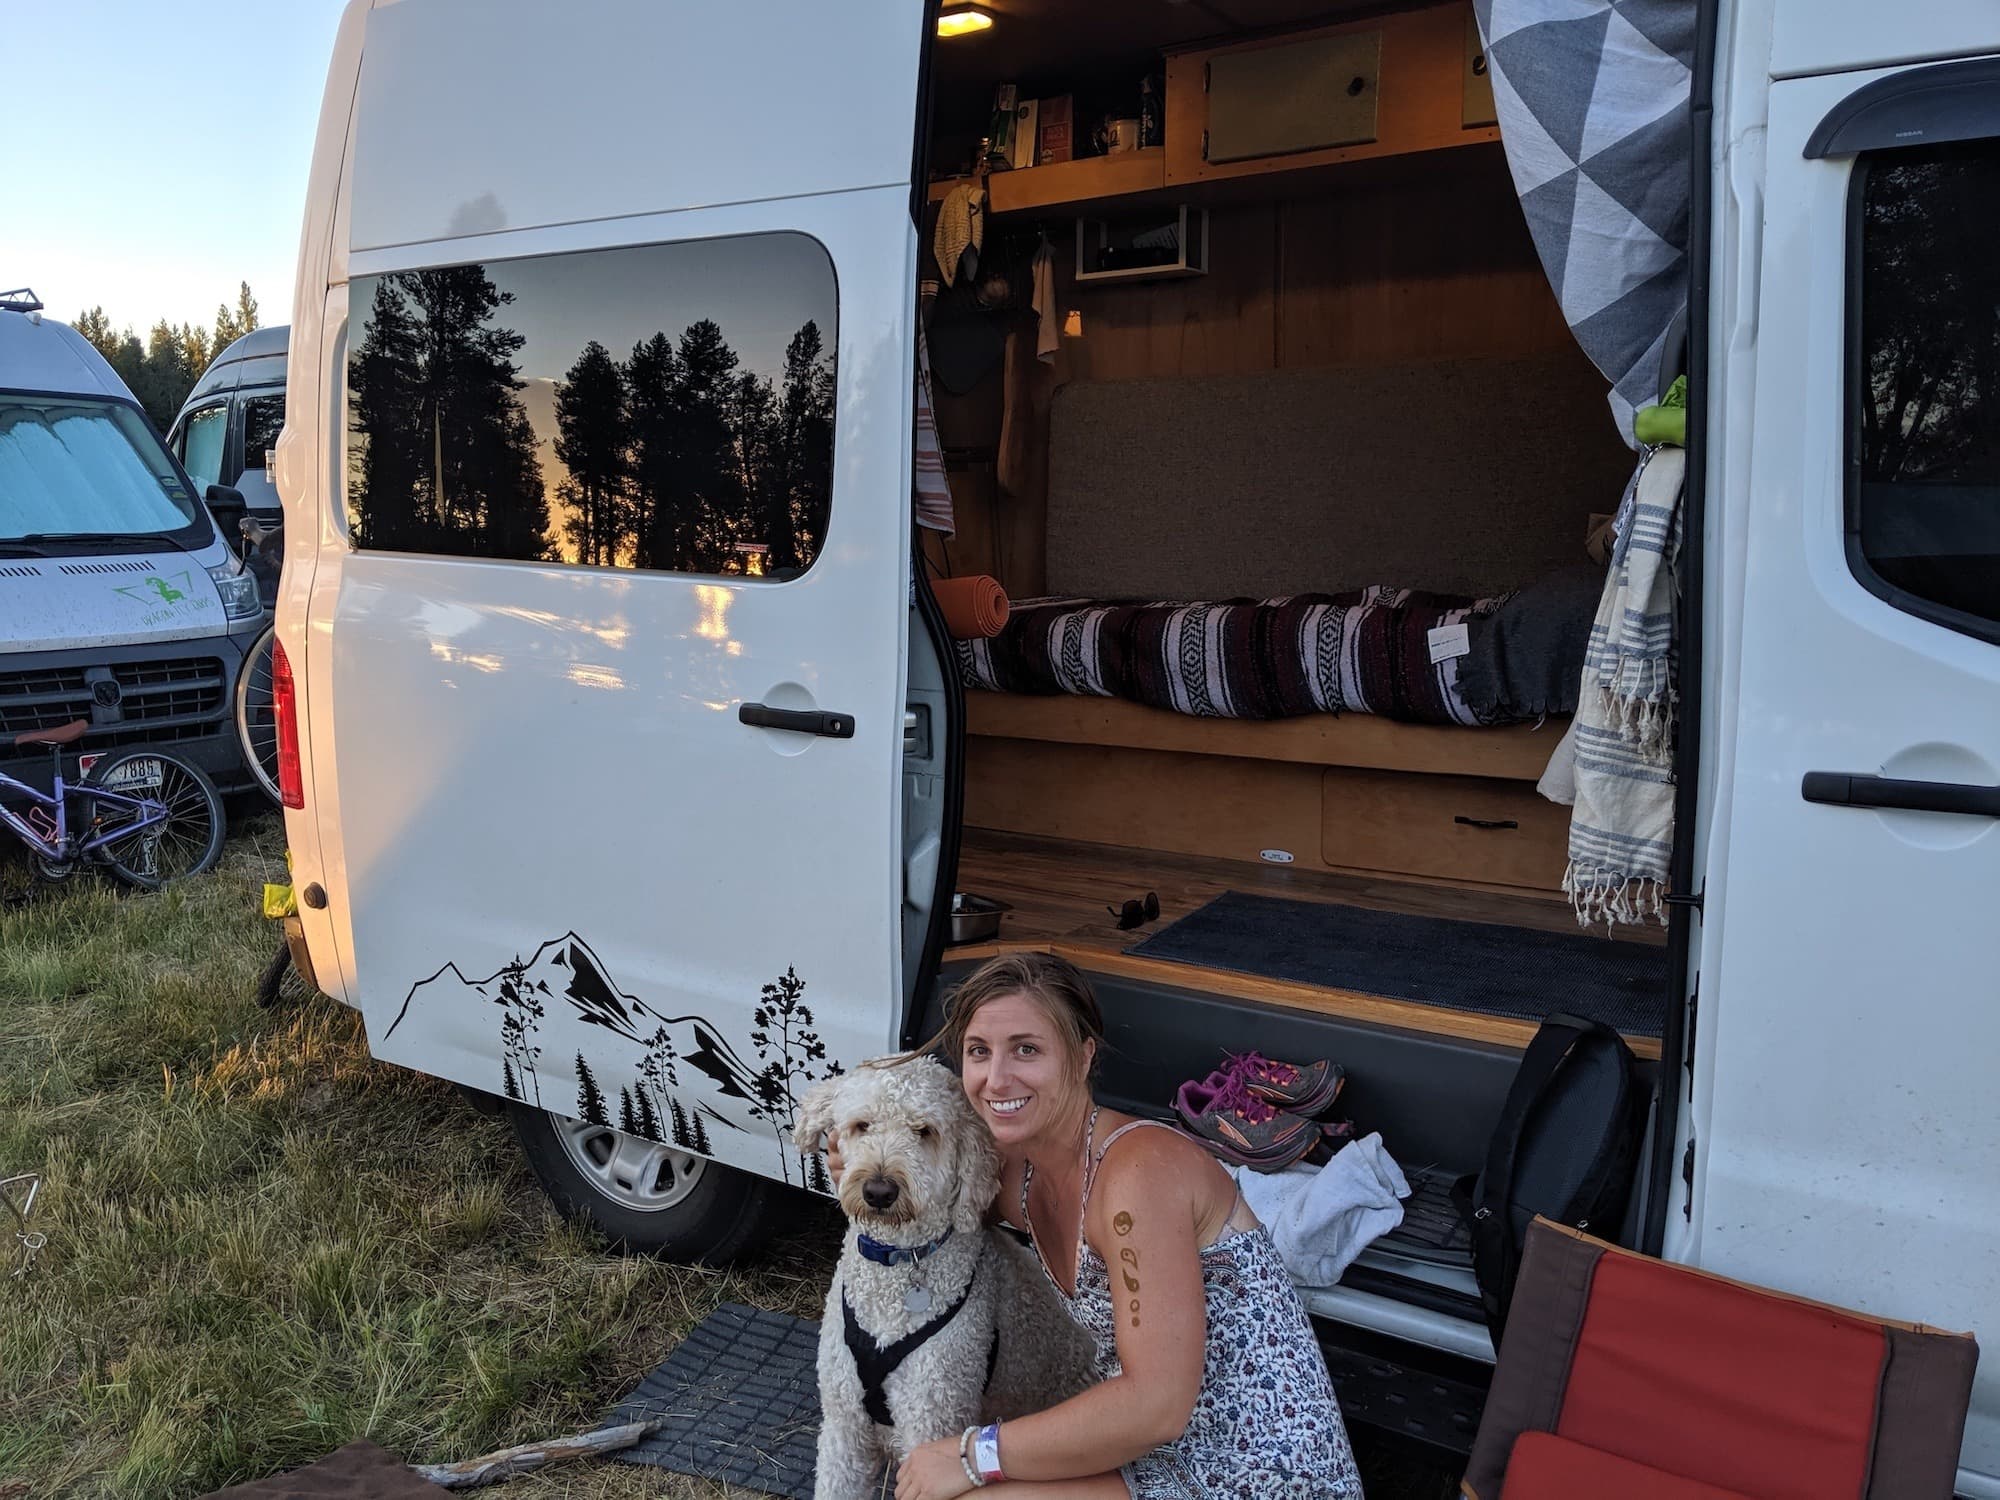 Check out 8 cool camper vans we saw at Open Roads Fest that were creative and unique at Jug Mountain Ranch in McCall, Idaho. 